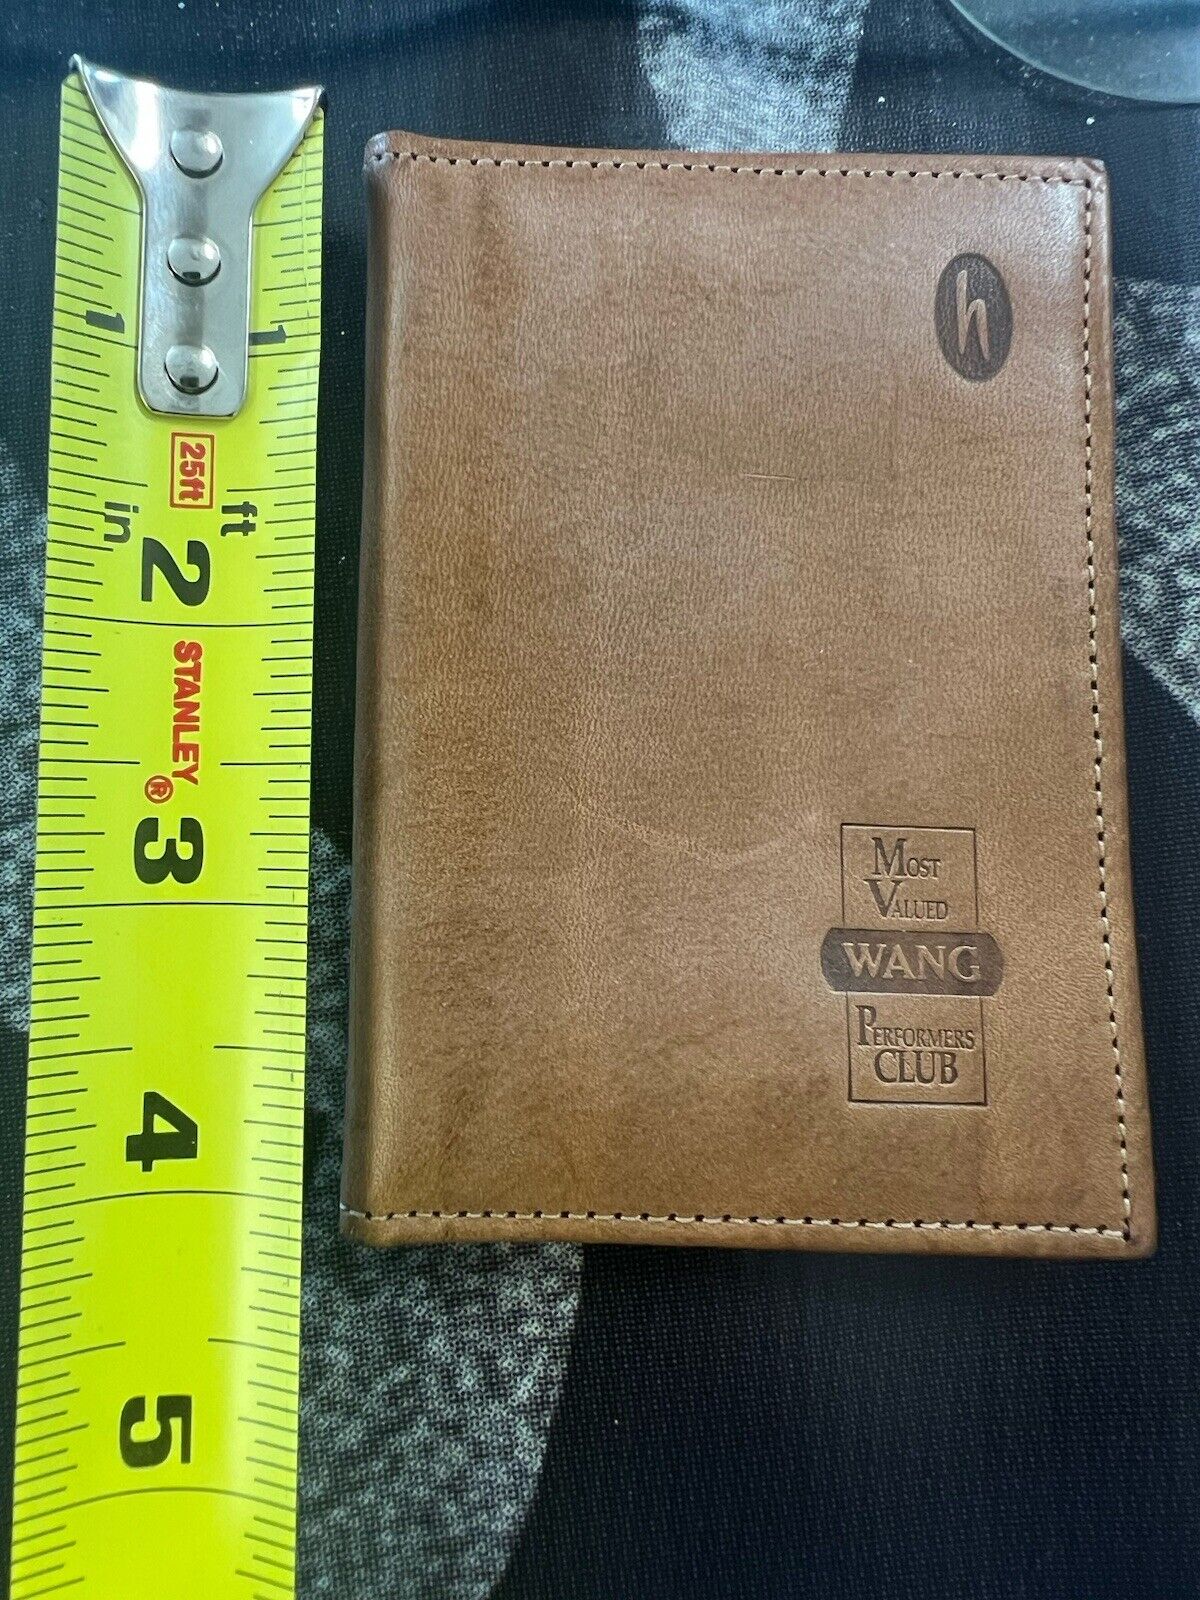 Wang Labs Computer Vintage Rare Company MVP Leather Wallet ID Cards Holder